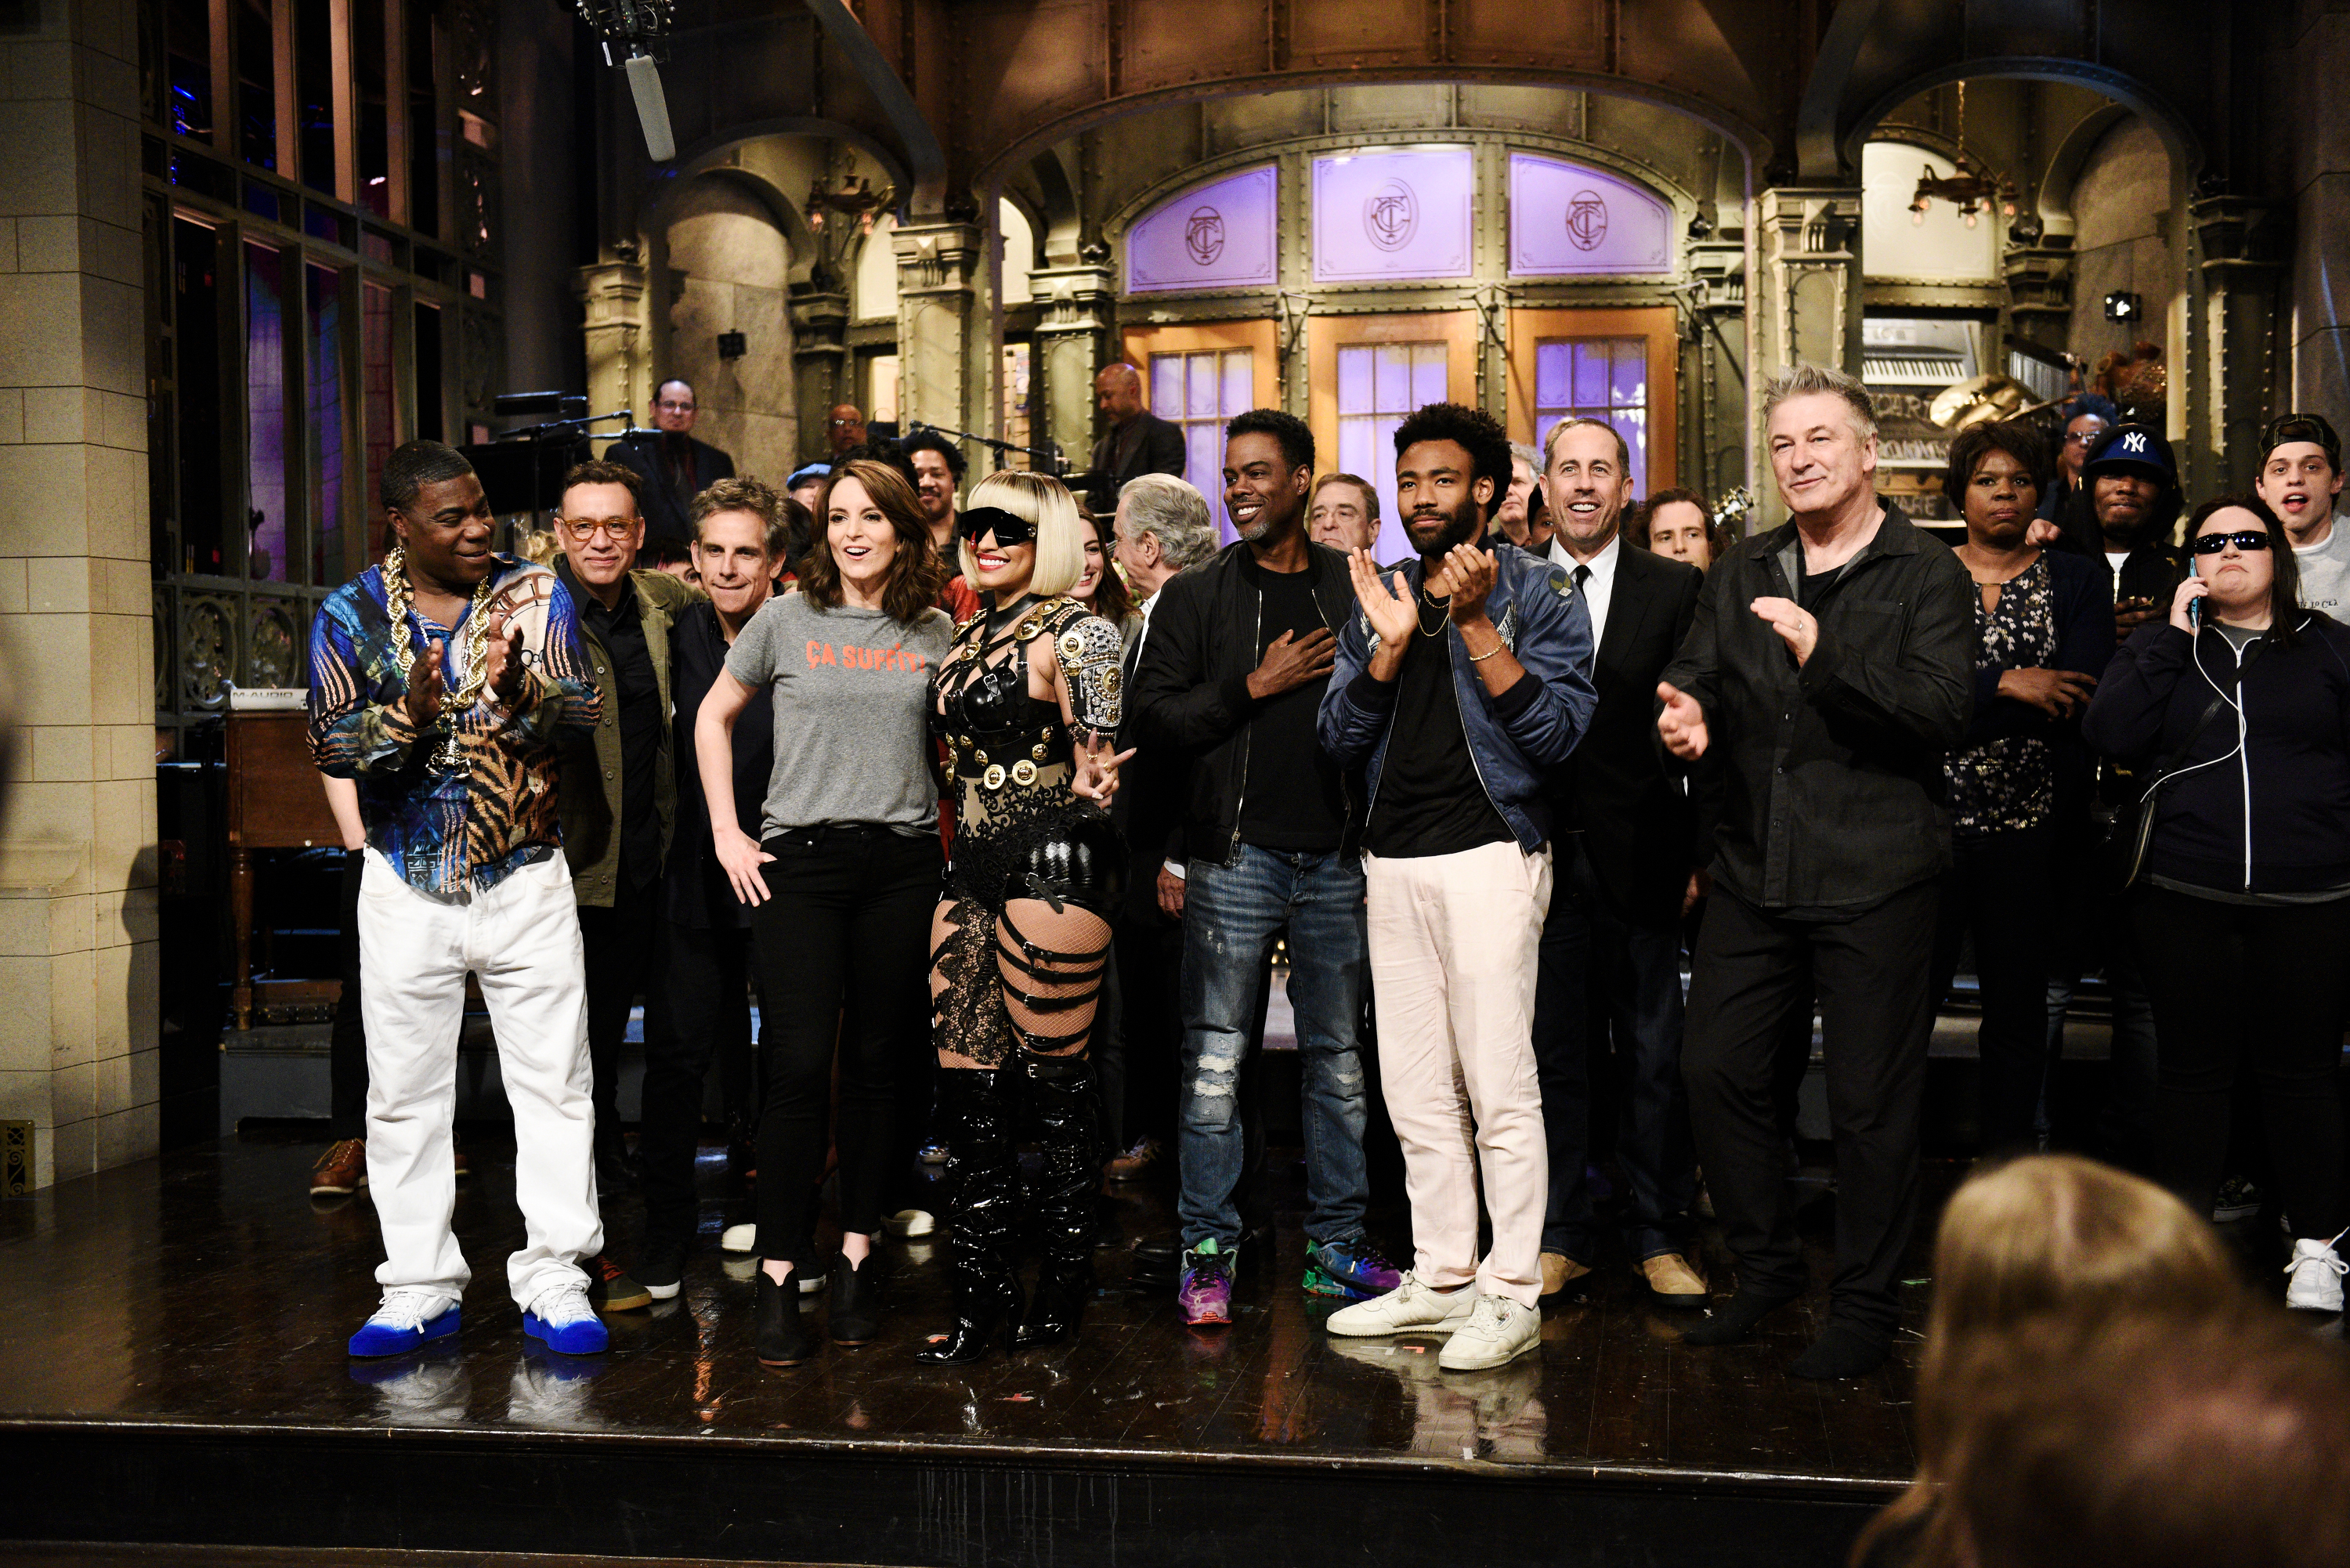 SATURDAY NIGHT LIVE -- "Tina Fey" Episode 1746 -- Pictured: (l-r) Tracy Morgan, Fred Armisen, Ben Stiller, Host Tina Fey, Musical Guest Nicki Minaj, Chris Rock, Donald Glover, Jerry Seinfeld,  Alec Baldwin during "Goodnights &amp; Credits" in Studio 8H on Saturday, May 19, 2018. (Will Heath - NBCU Photo Bank/Getty Images)